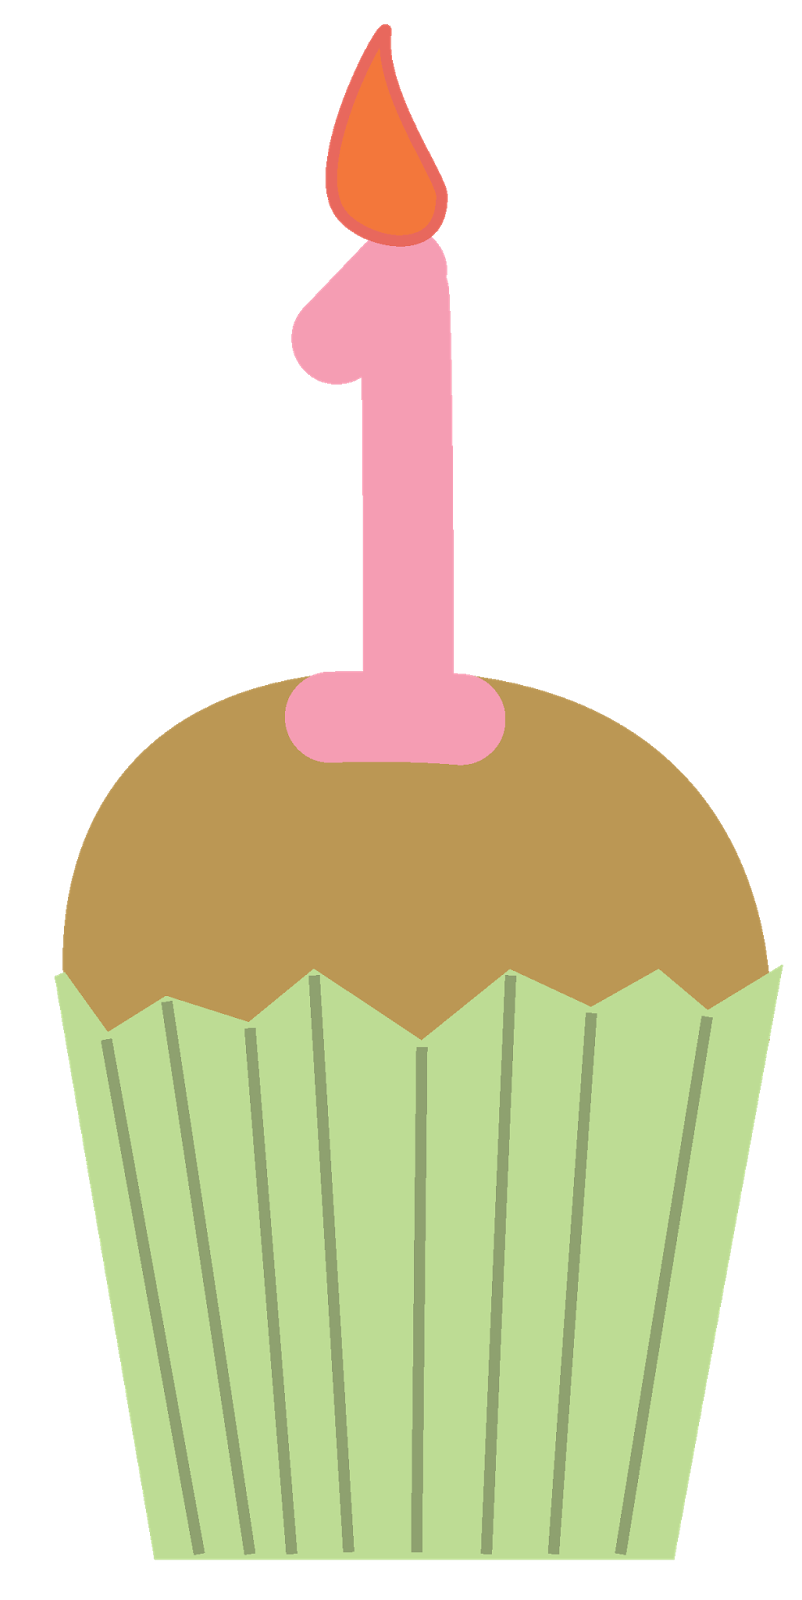 Birthday cupcakes free images. Muffins clipart large